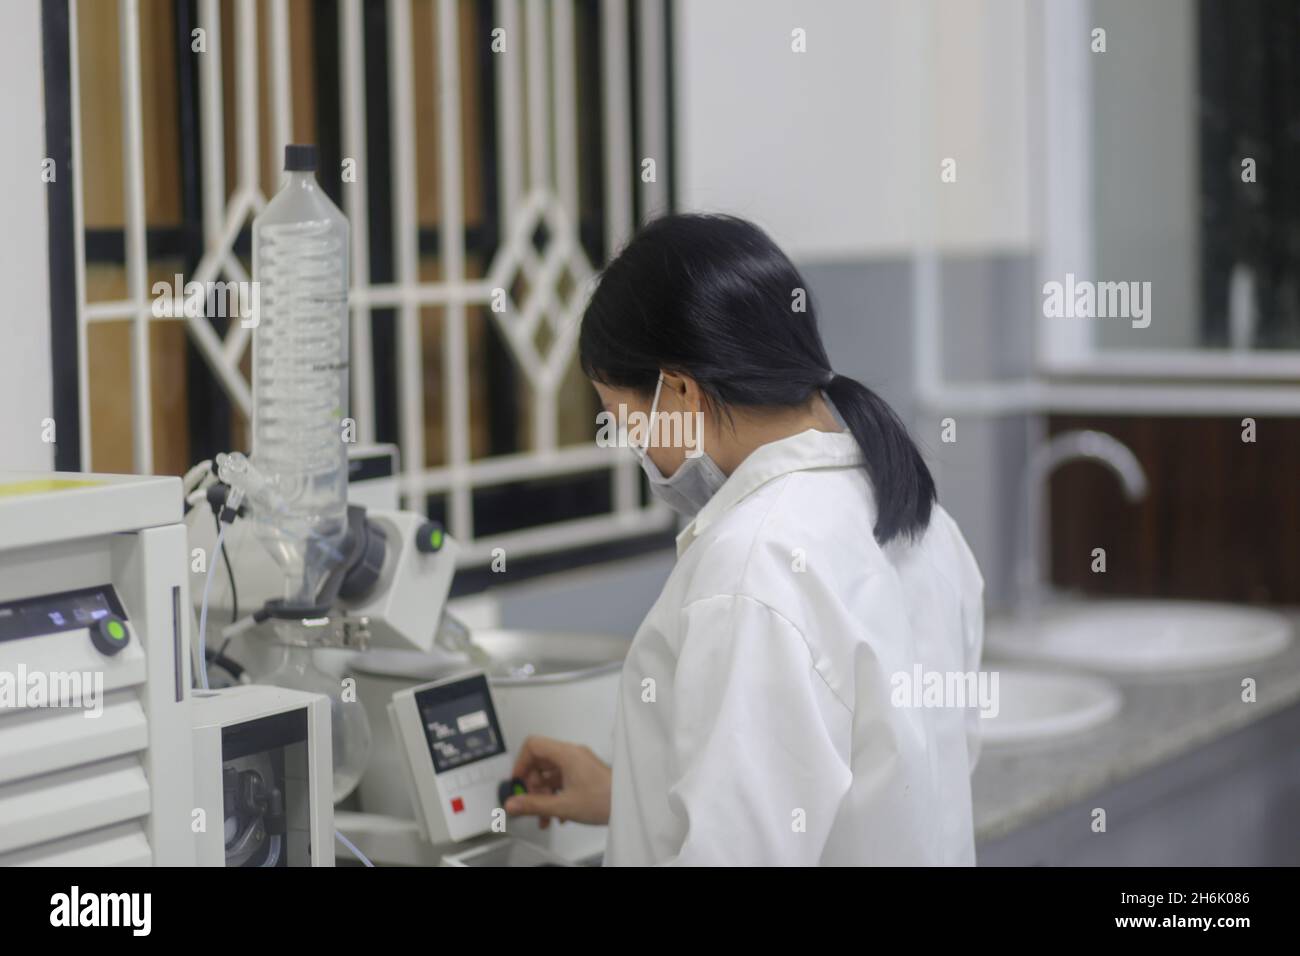 Vietnamese woman scientist operating a rotary evaporator to make an experiment in the laboratory Stock Photo